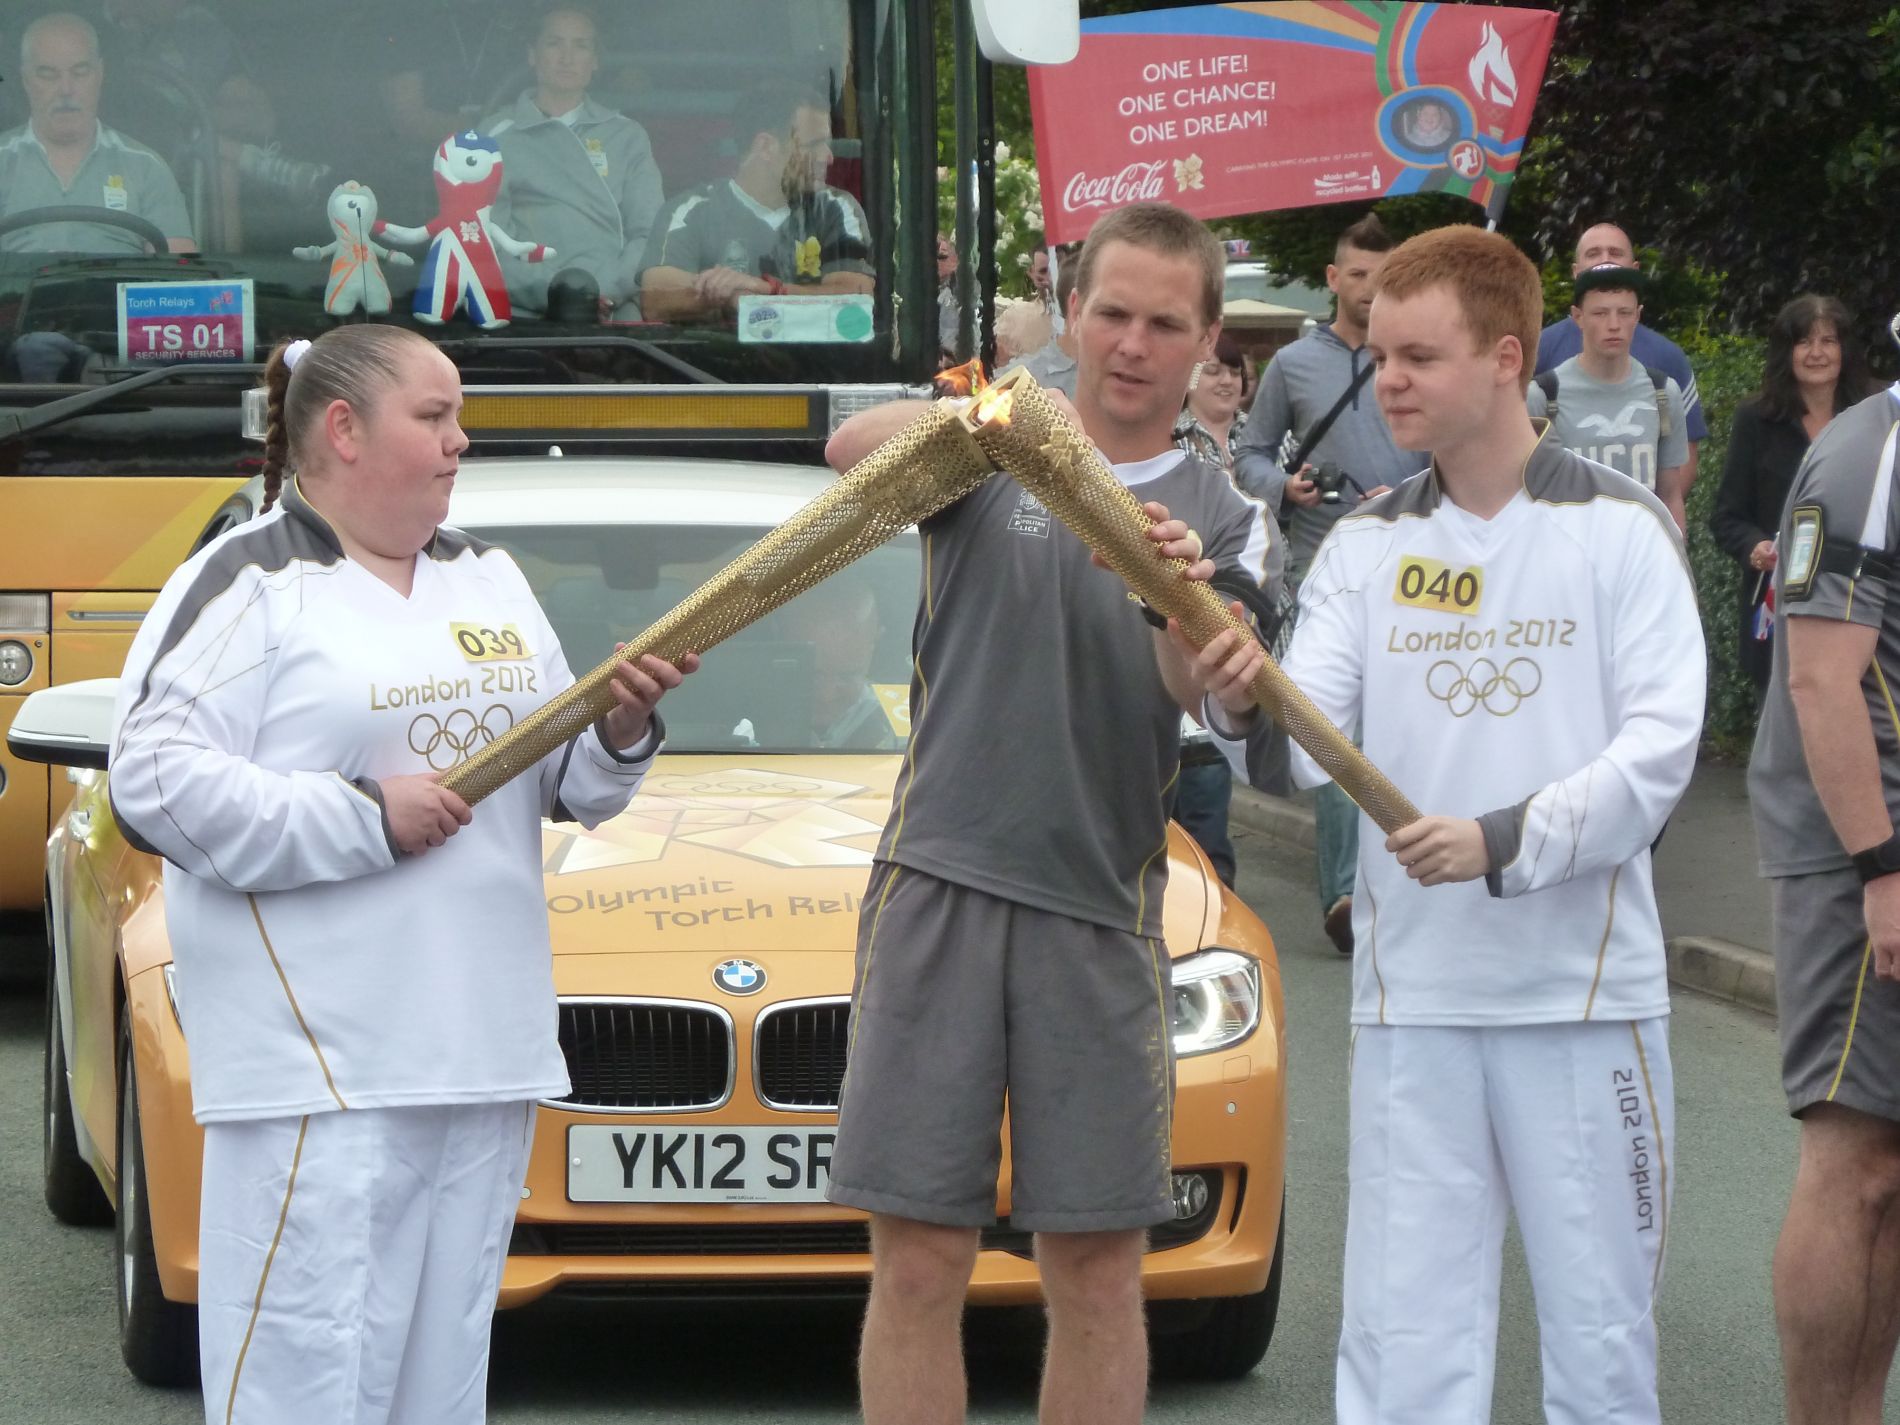 2012 Olympic Torch Burscough changeover by Worm That Turned via Wikimedia Commons